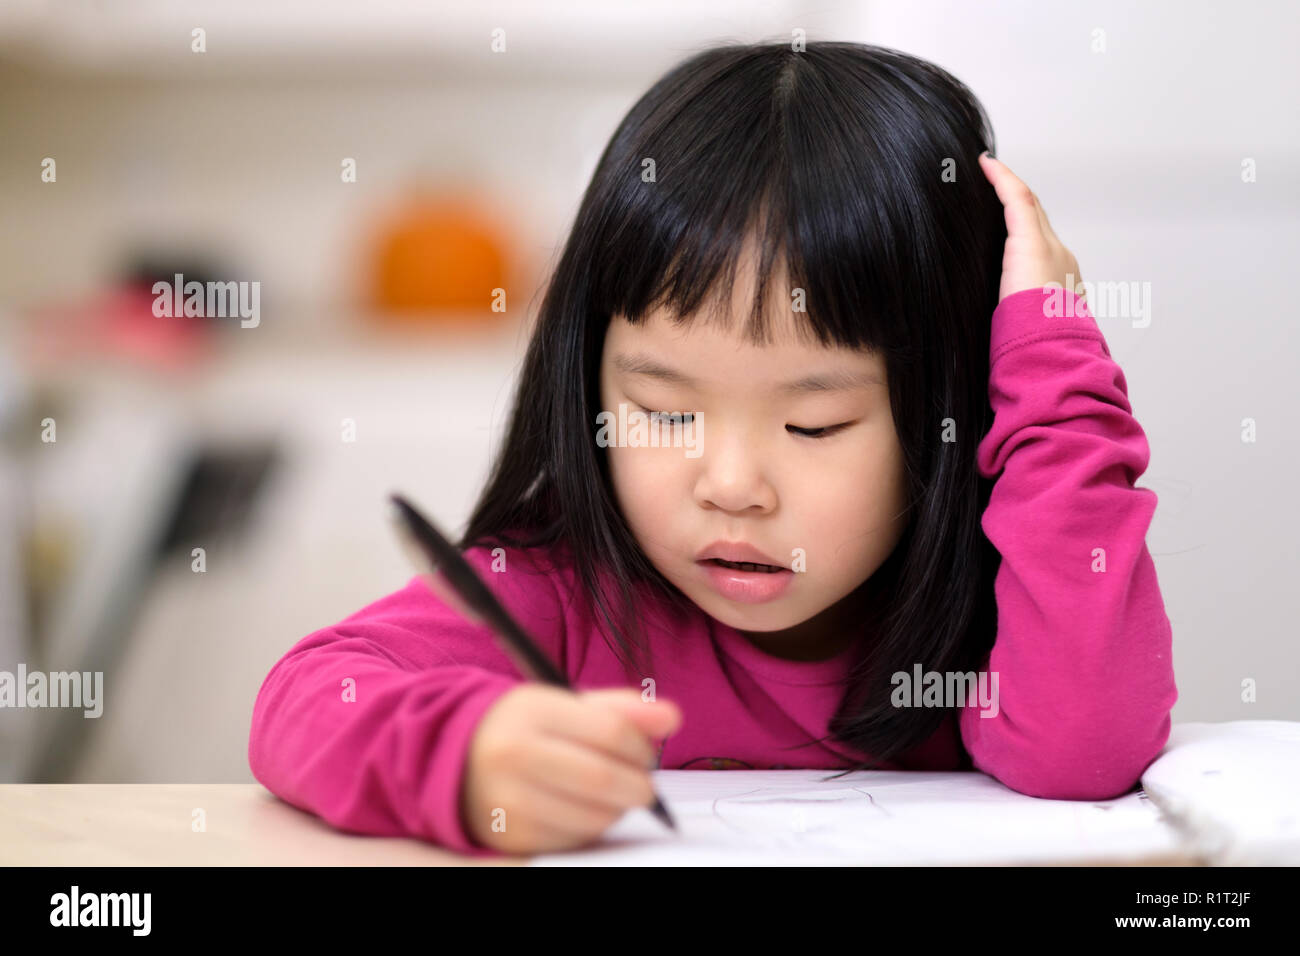 Young little Asian girl learning to write Stock Photo